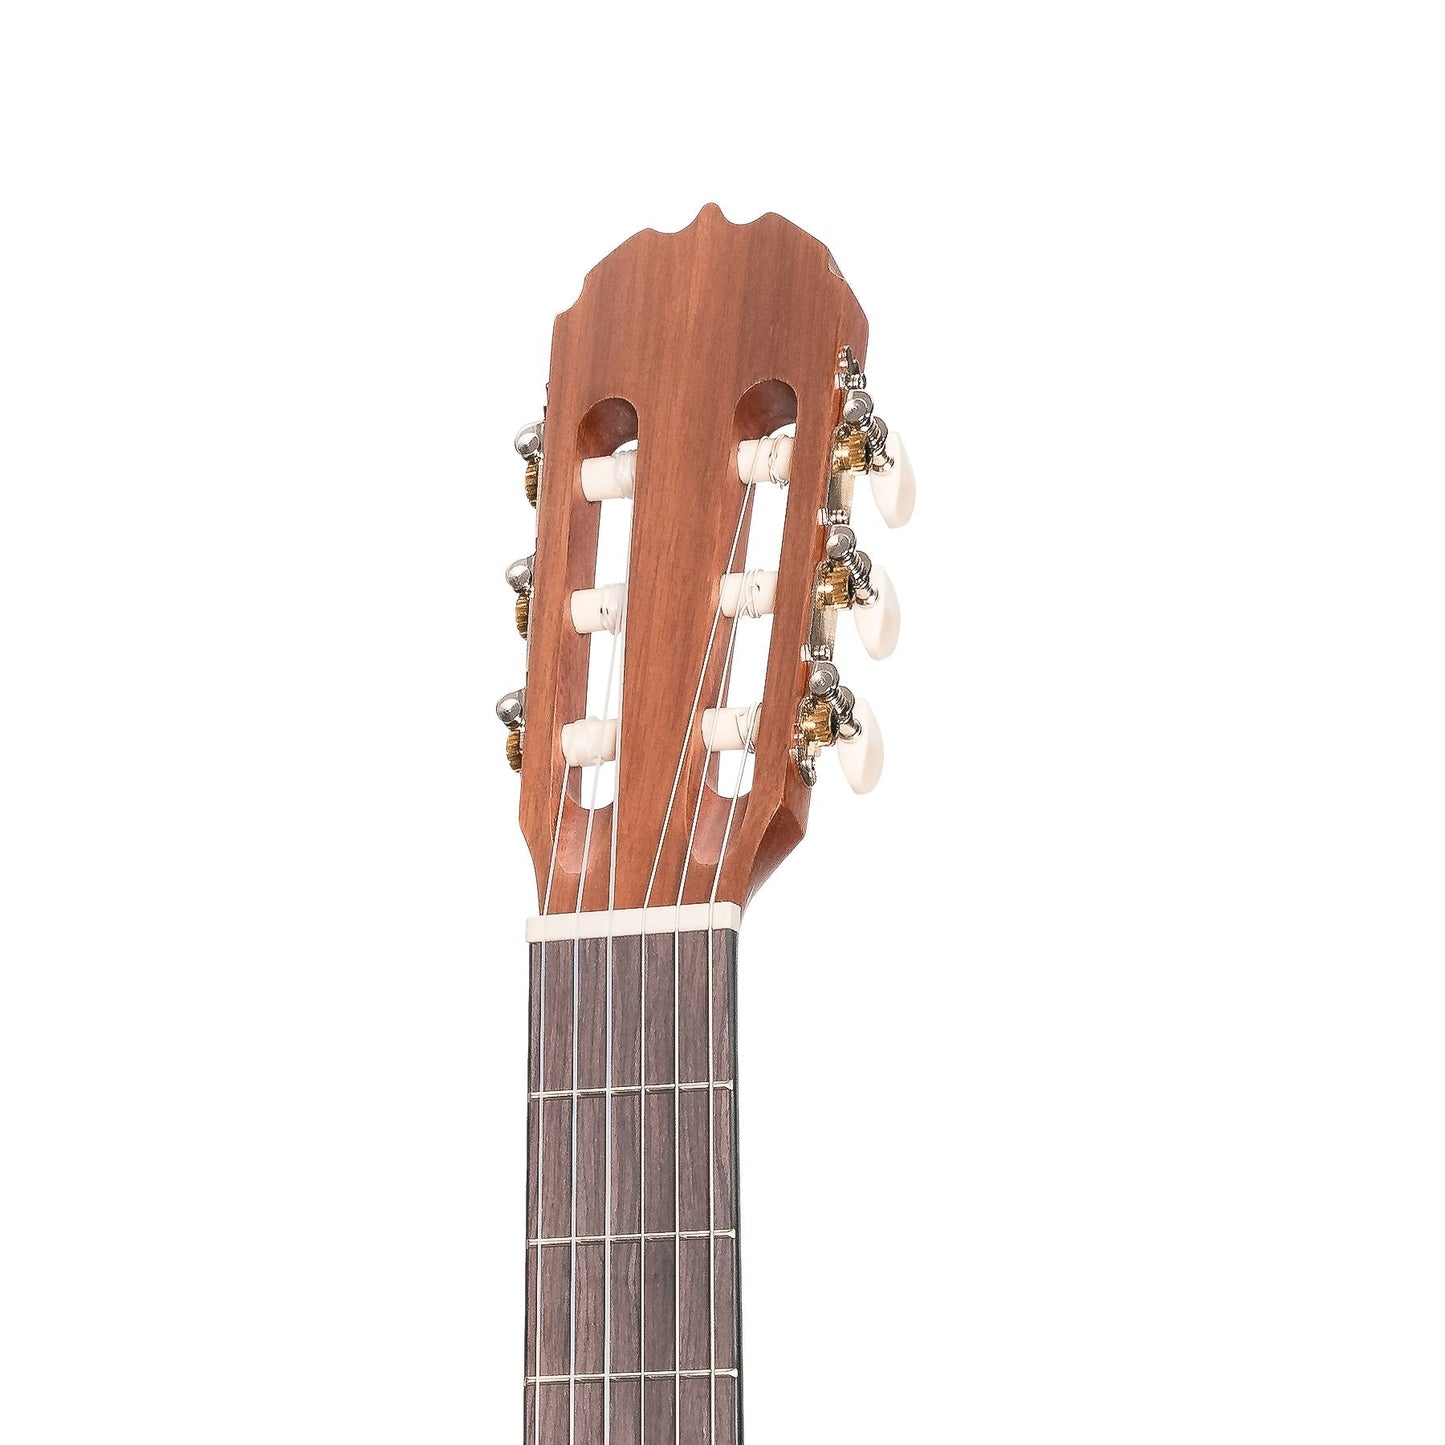 Load image into Gallery viewer, Martinez &amp;#39;Natural Series&amp;#39; Left Handed Spruce Top Acoustic-Electric Classical Cutaway Guitar (Open Pore)
